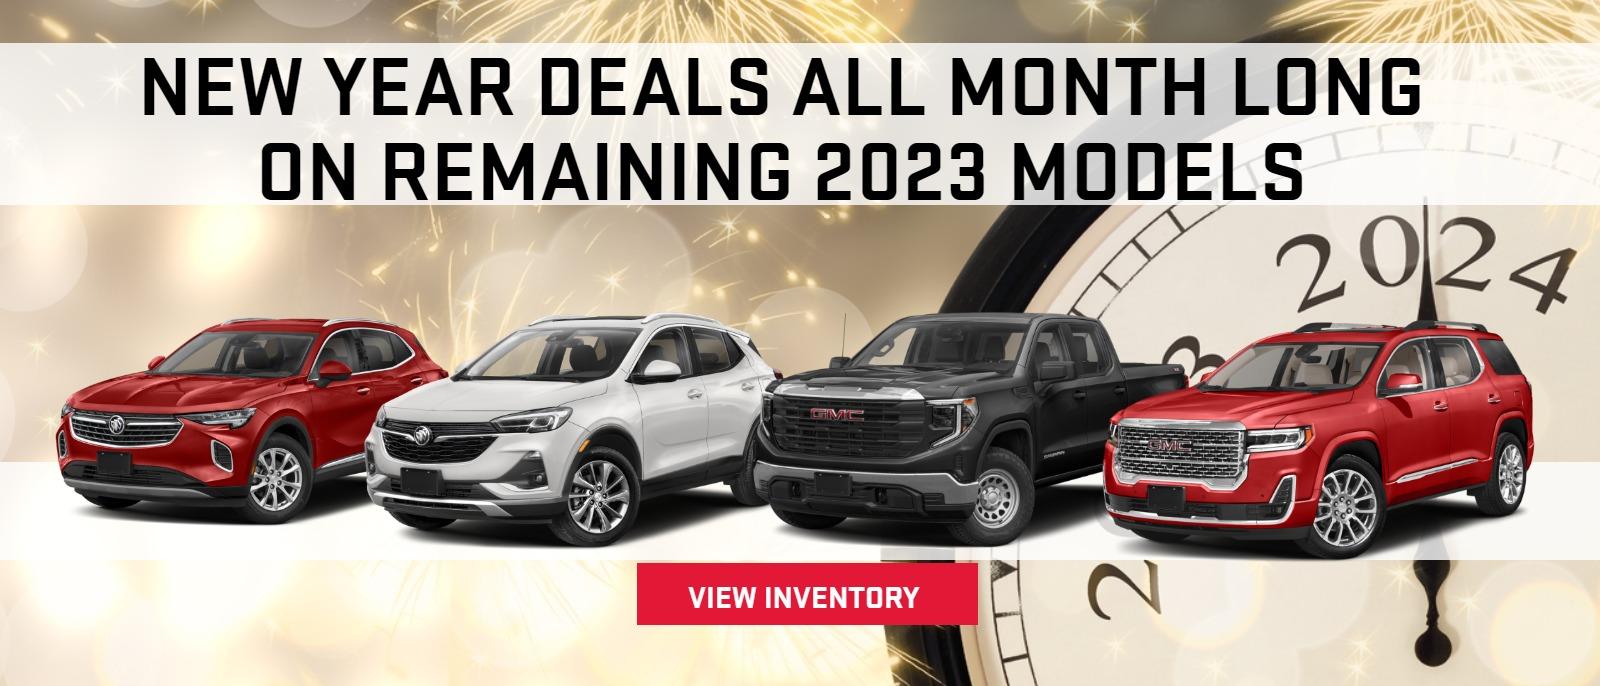 New Year Deals all Month long
on remaining 2023 Models